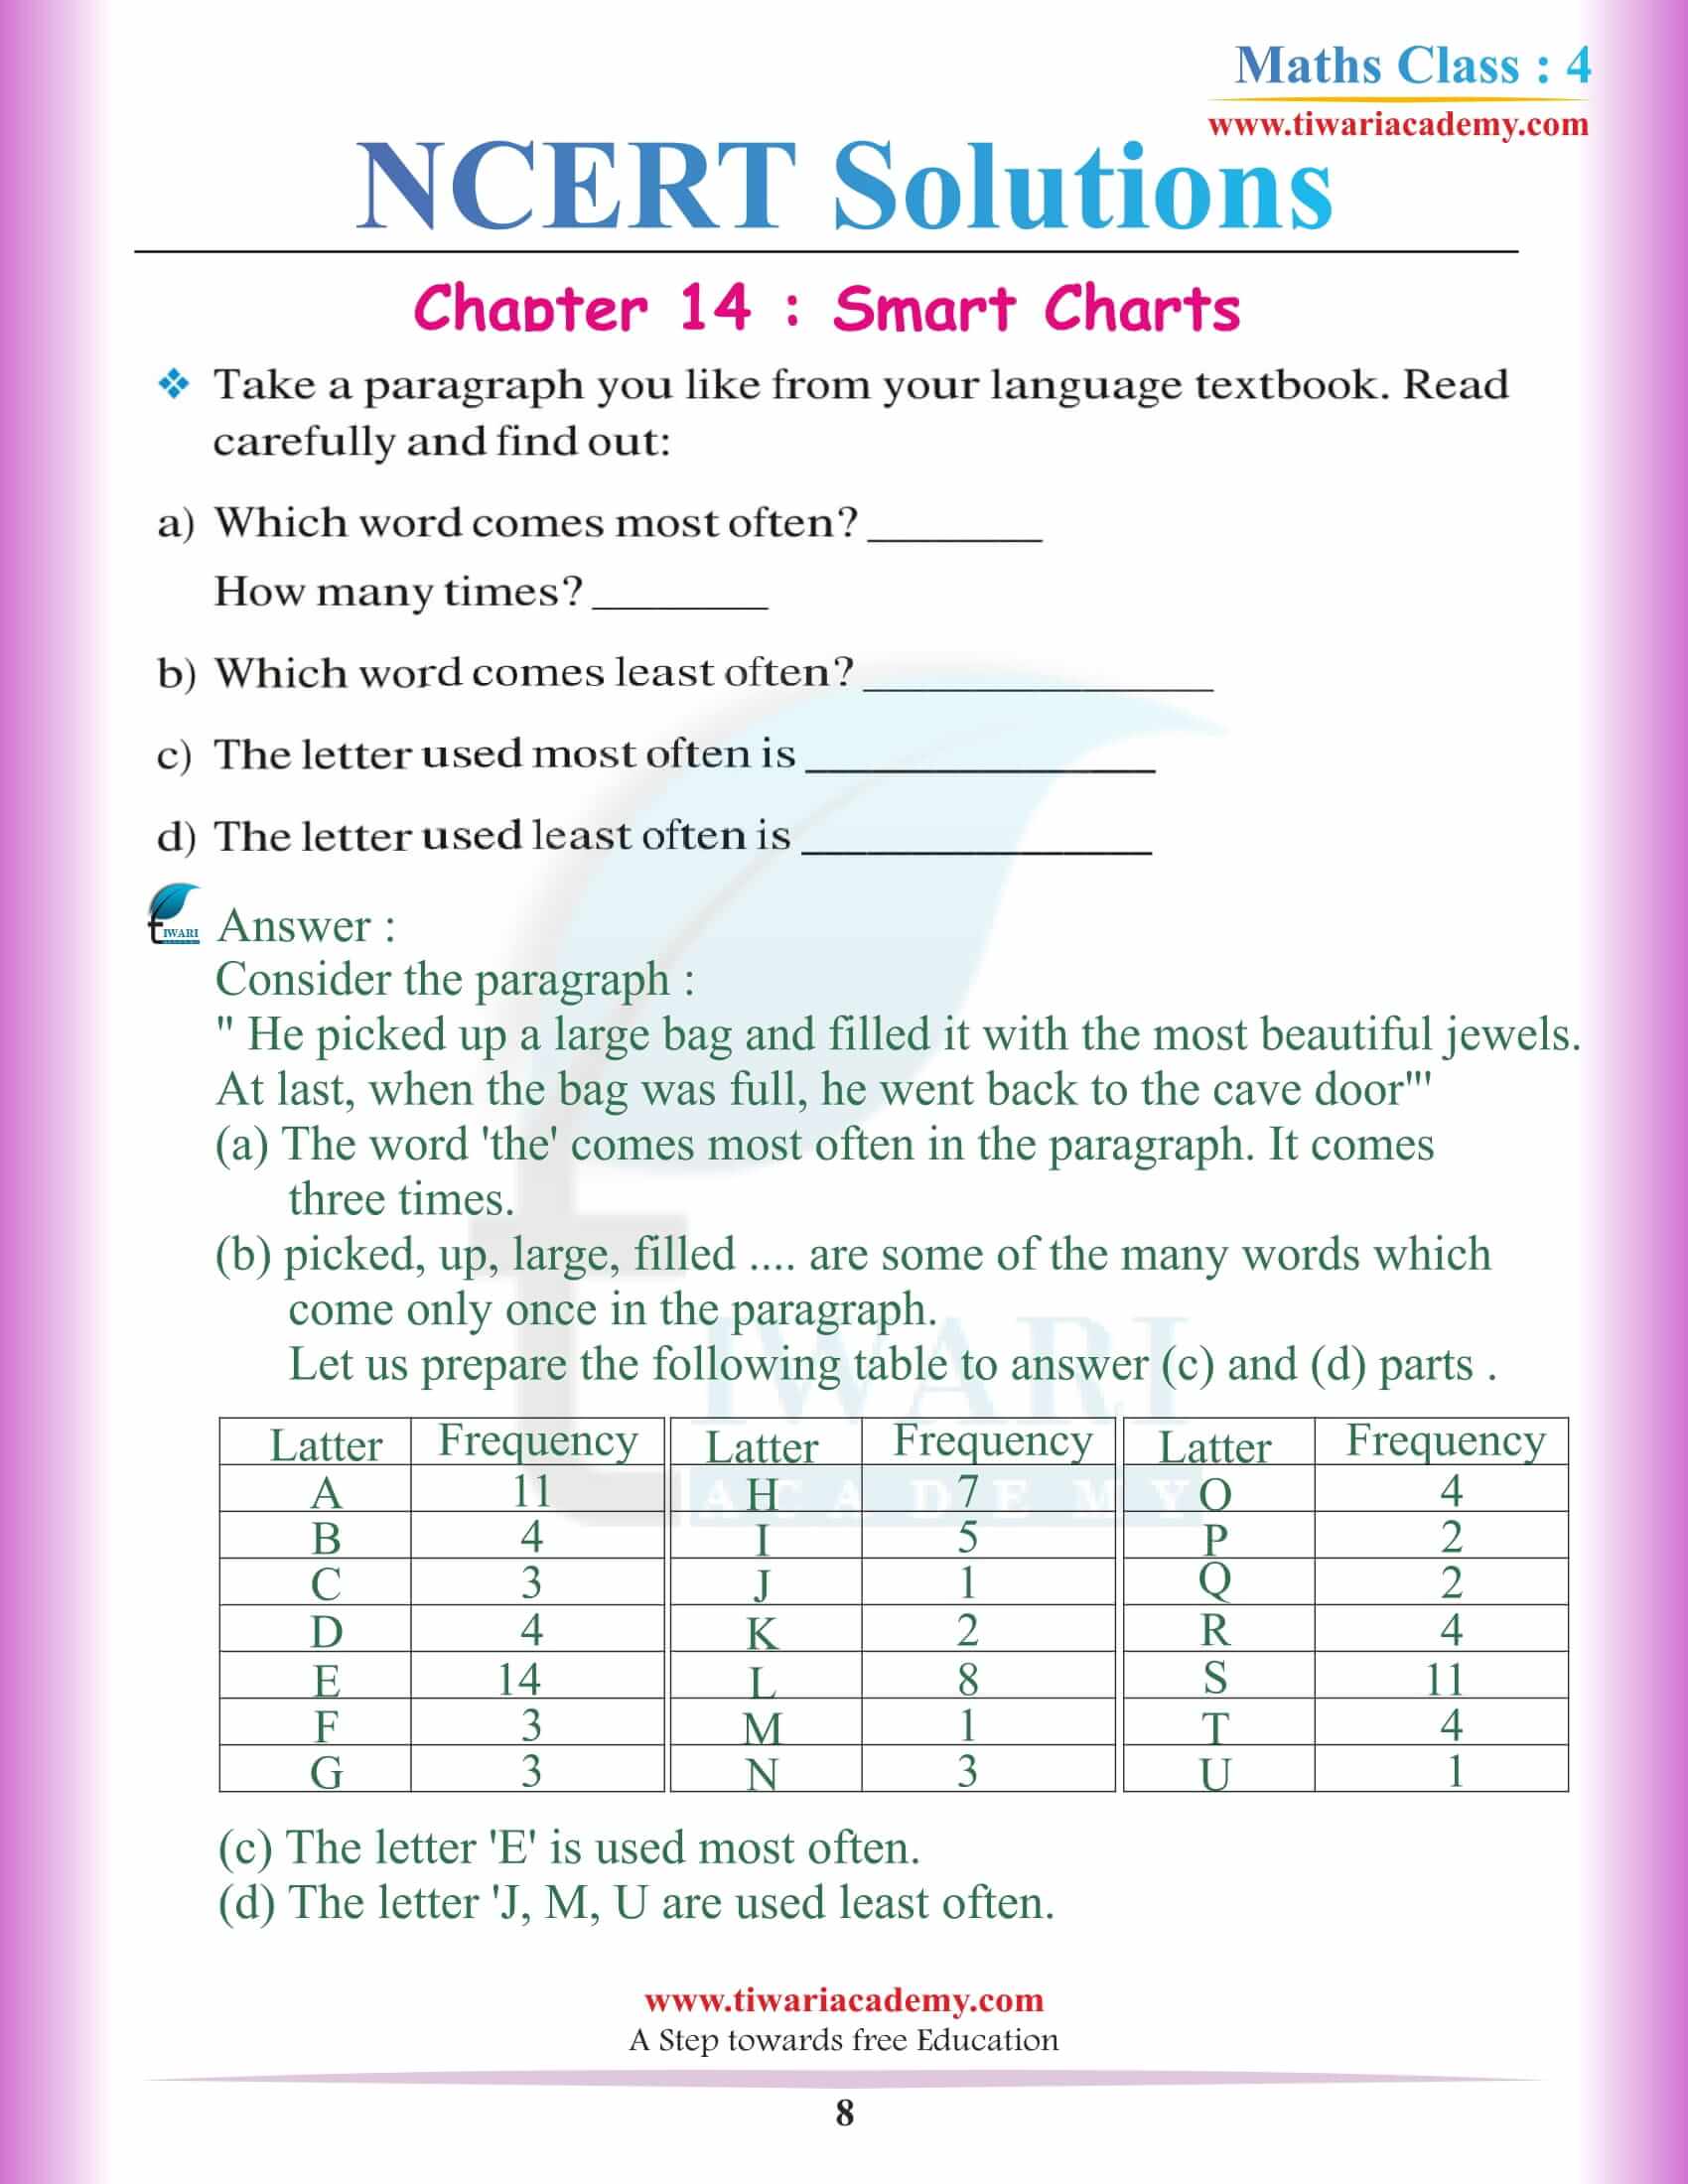 Class 4 Maths NCERT Chapter 14 Solutions in PDF